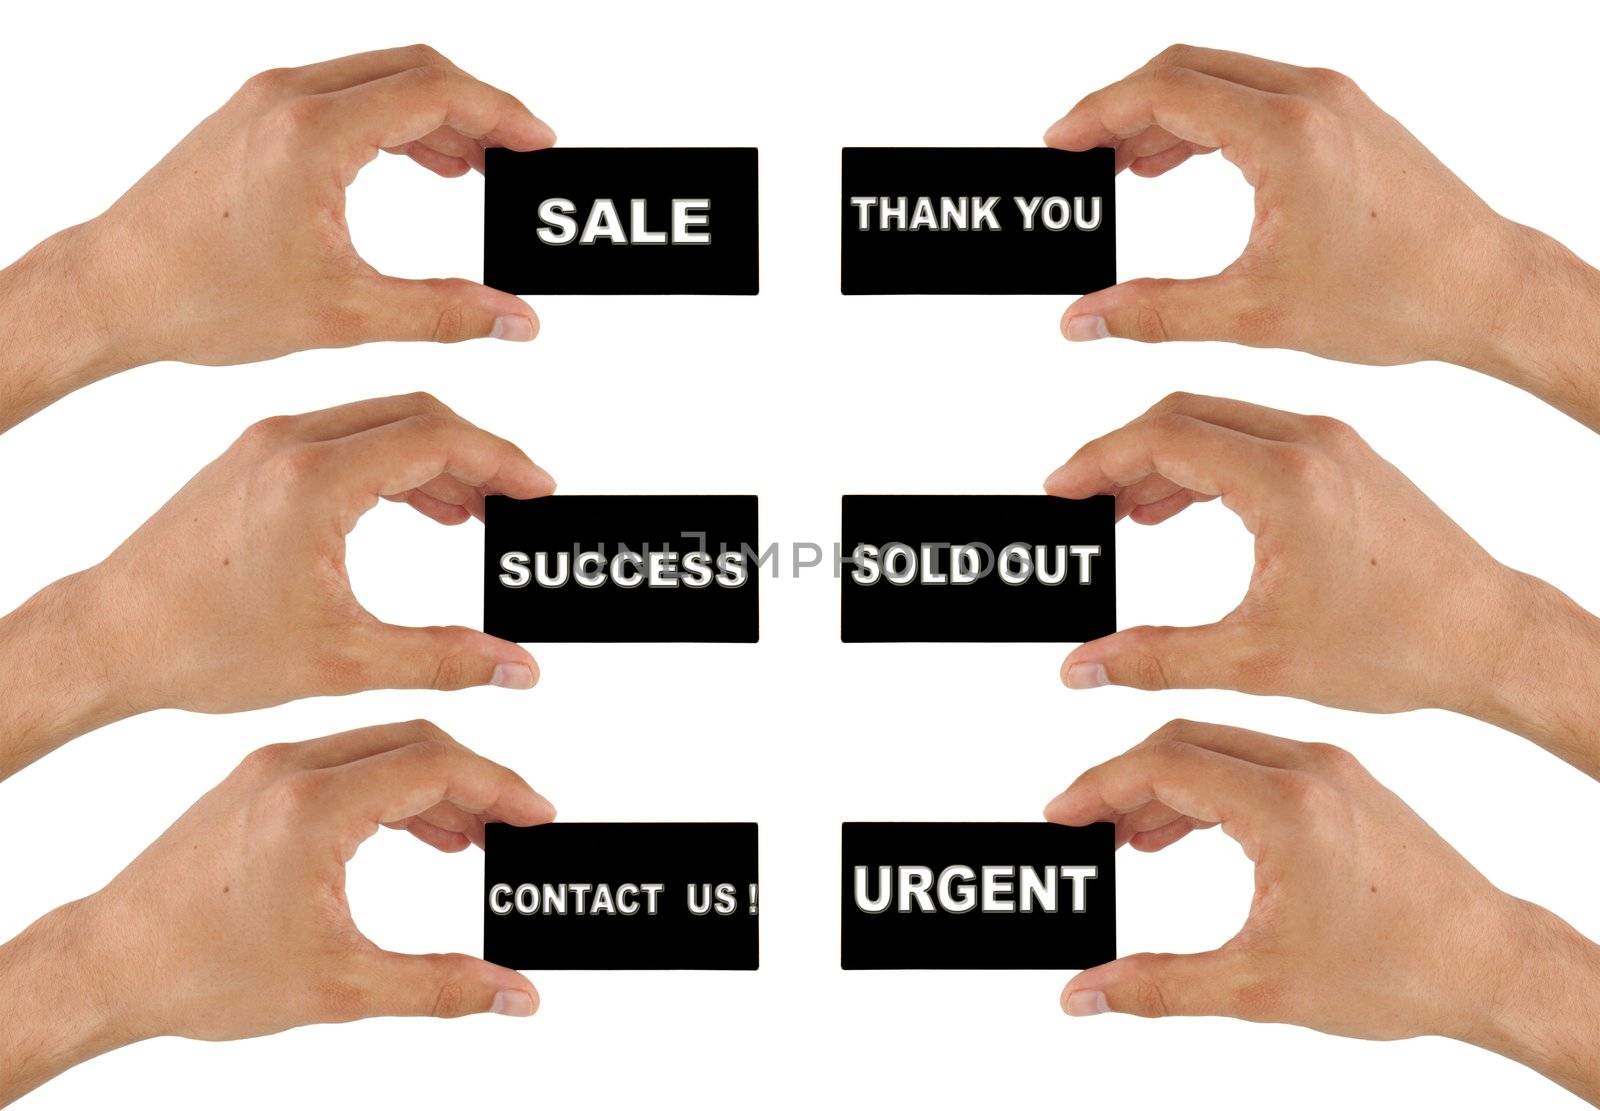 black business card in hand on white background with text: contact us, success, sale, thank you, sold out, urgent